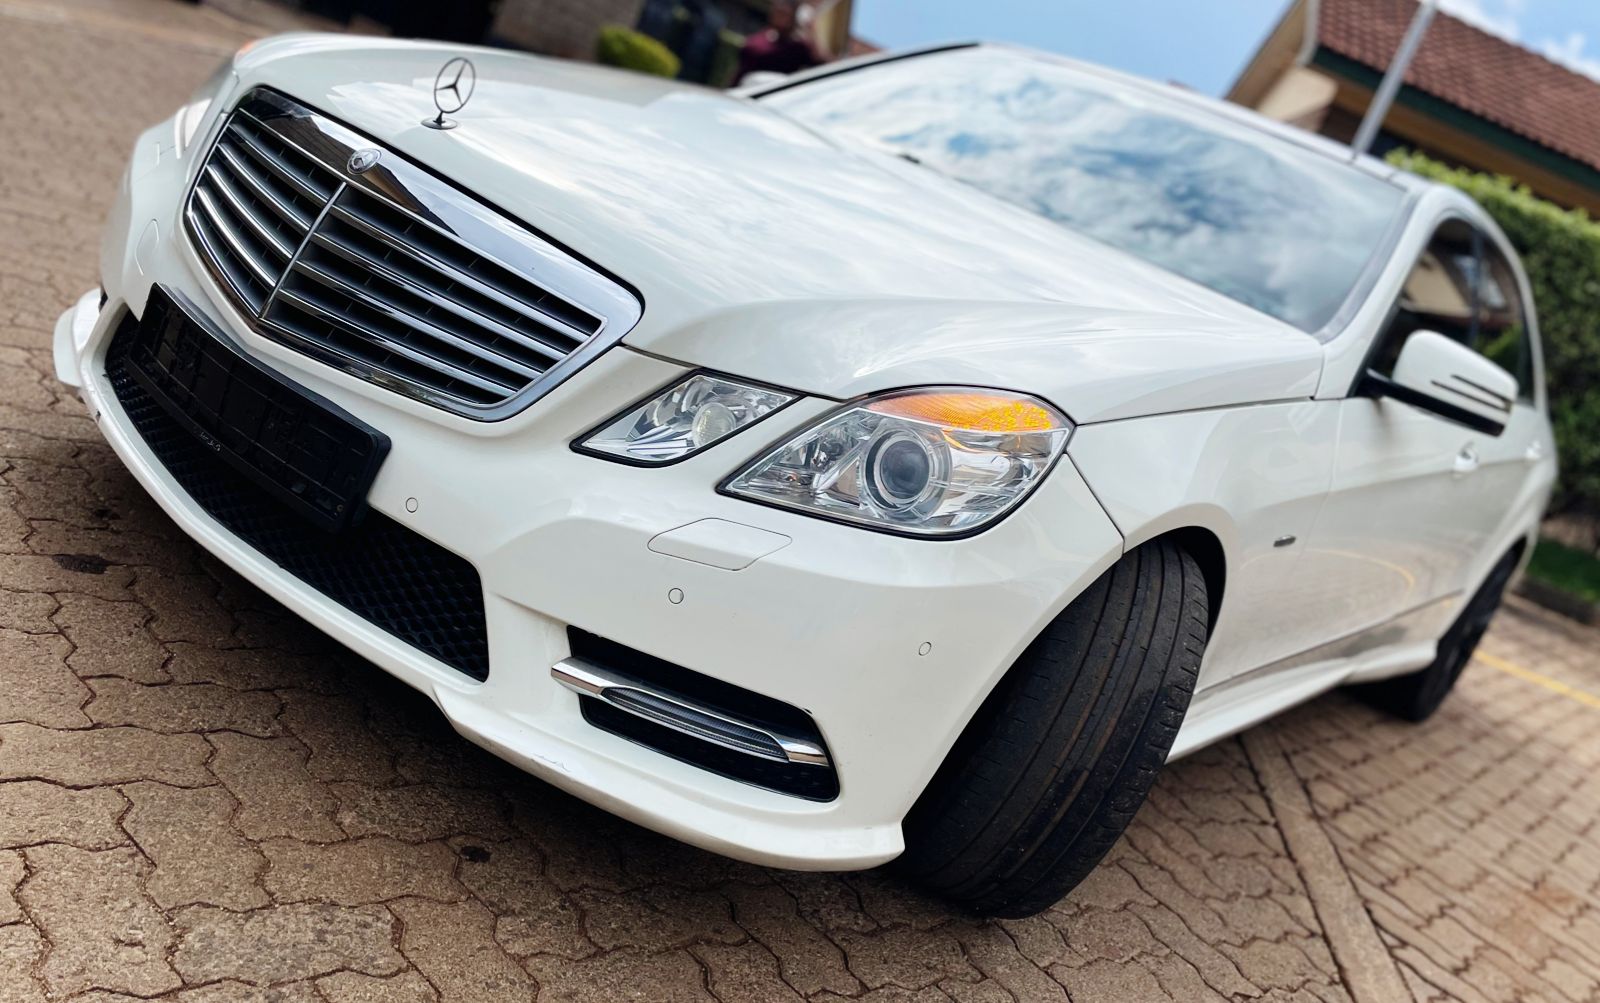 Mercedes Benz E250 SUNROOF Cheapest You Pay 30% DEPOSIT Trade in OK